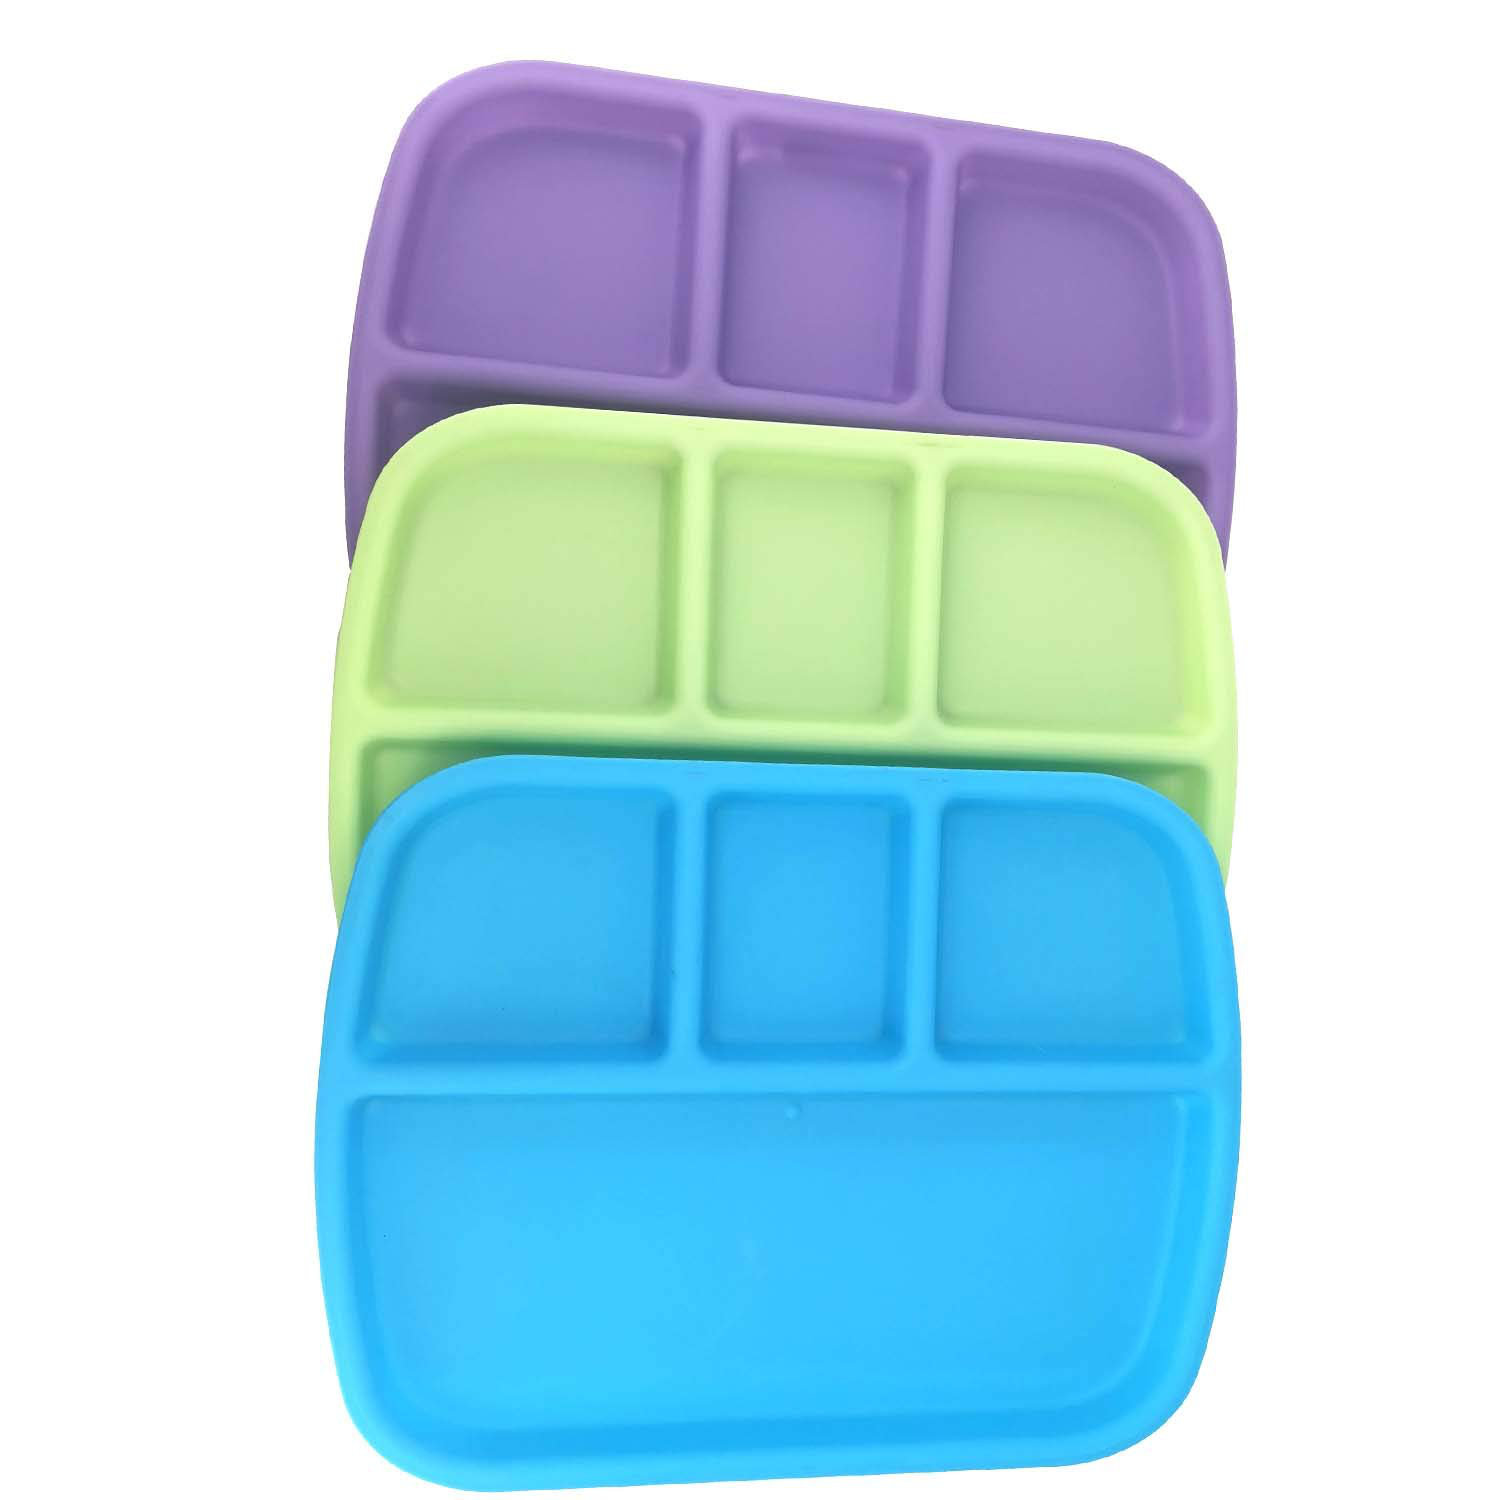 New Hard Plastic Divided Plate with Lid Toddler Blue with green 